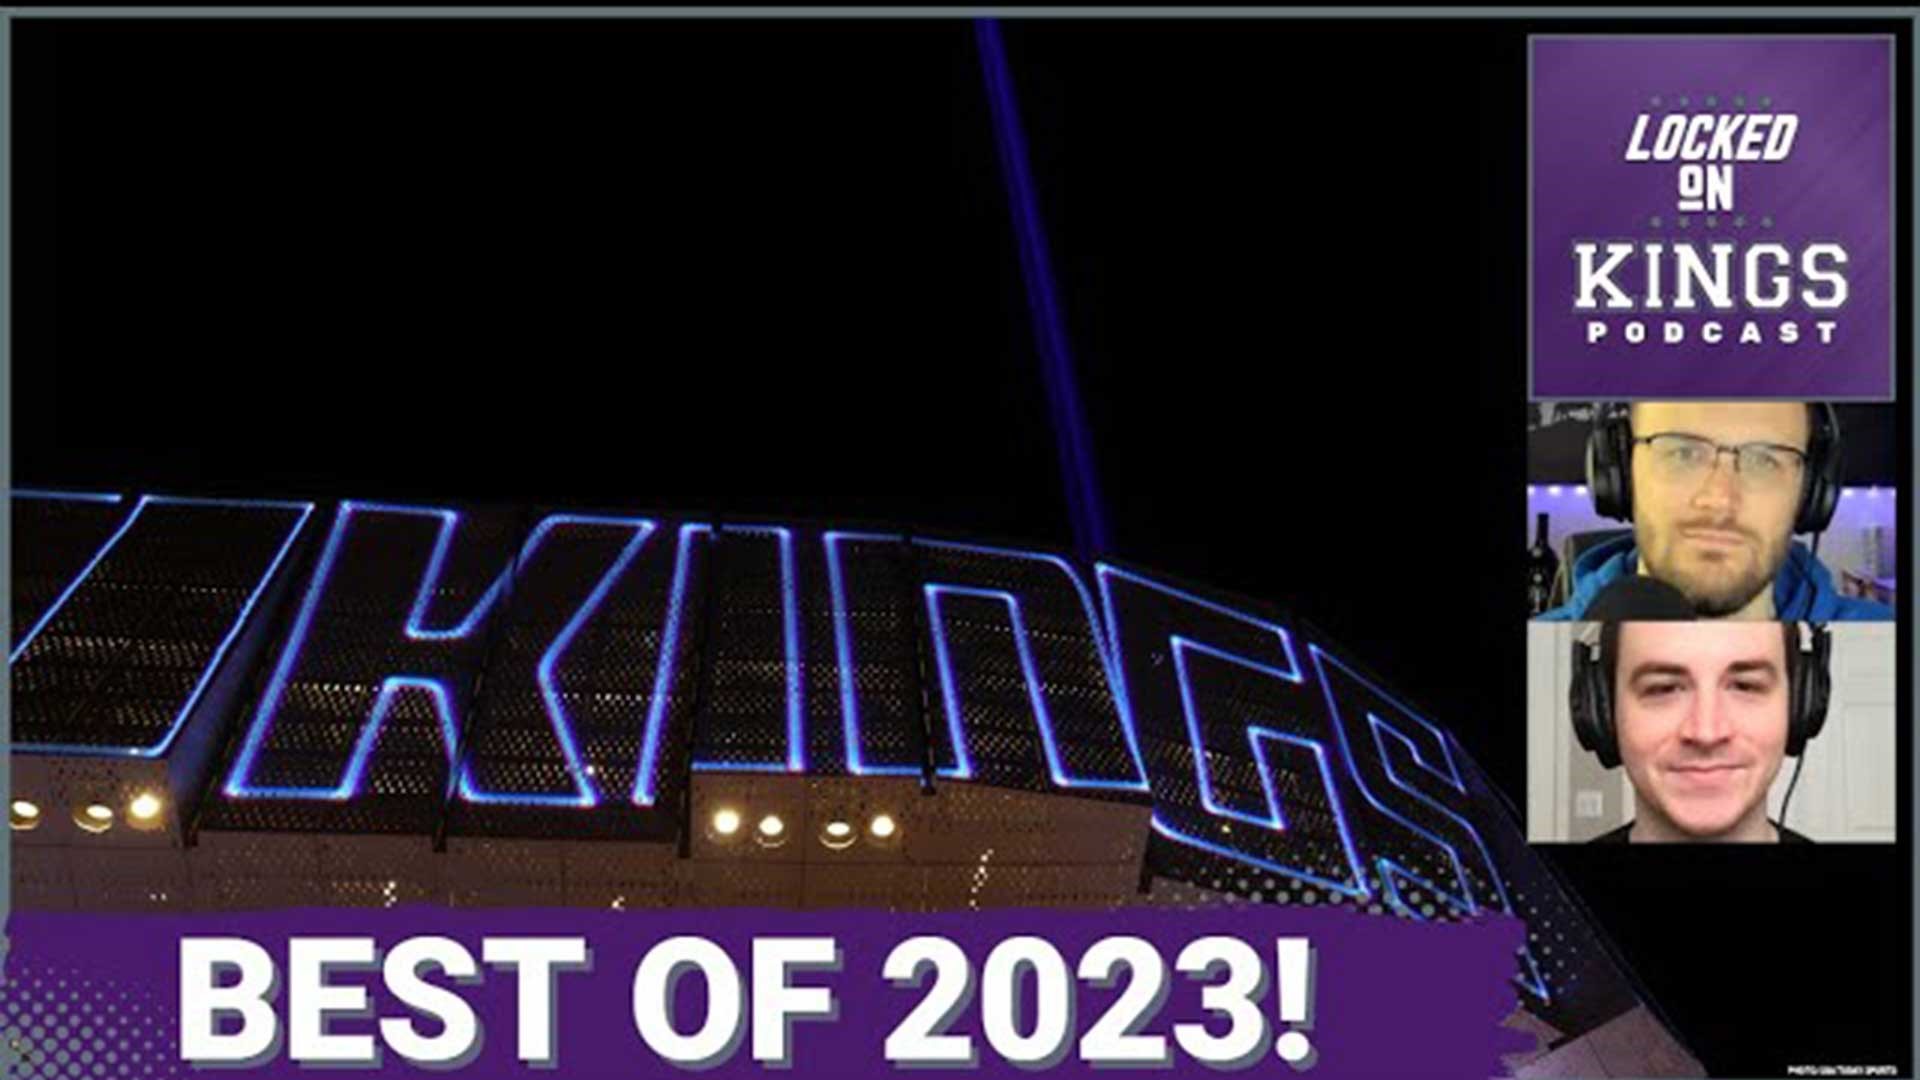 Matt George is joined by SacTown Sports' Frankie Cartoscelli to remember and discuss some of the best Sacramento Kings moments from 2023.